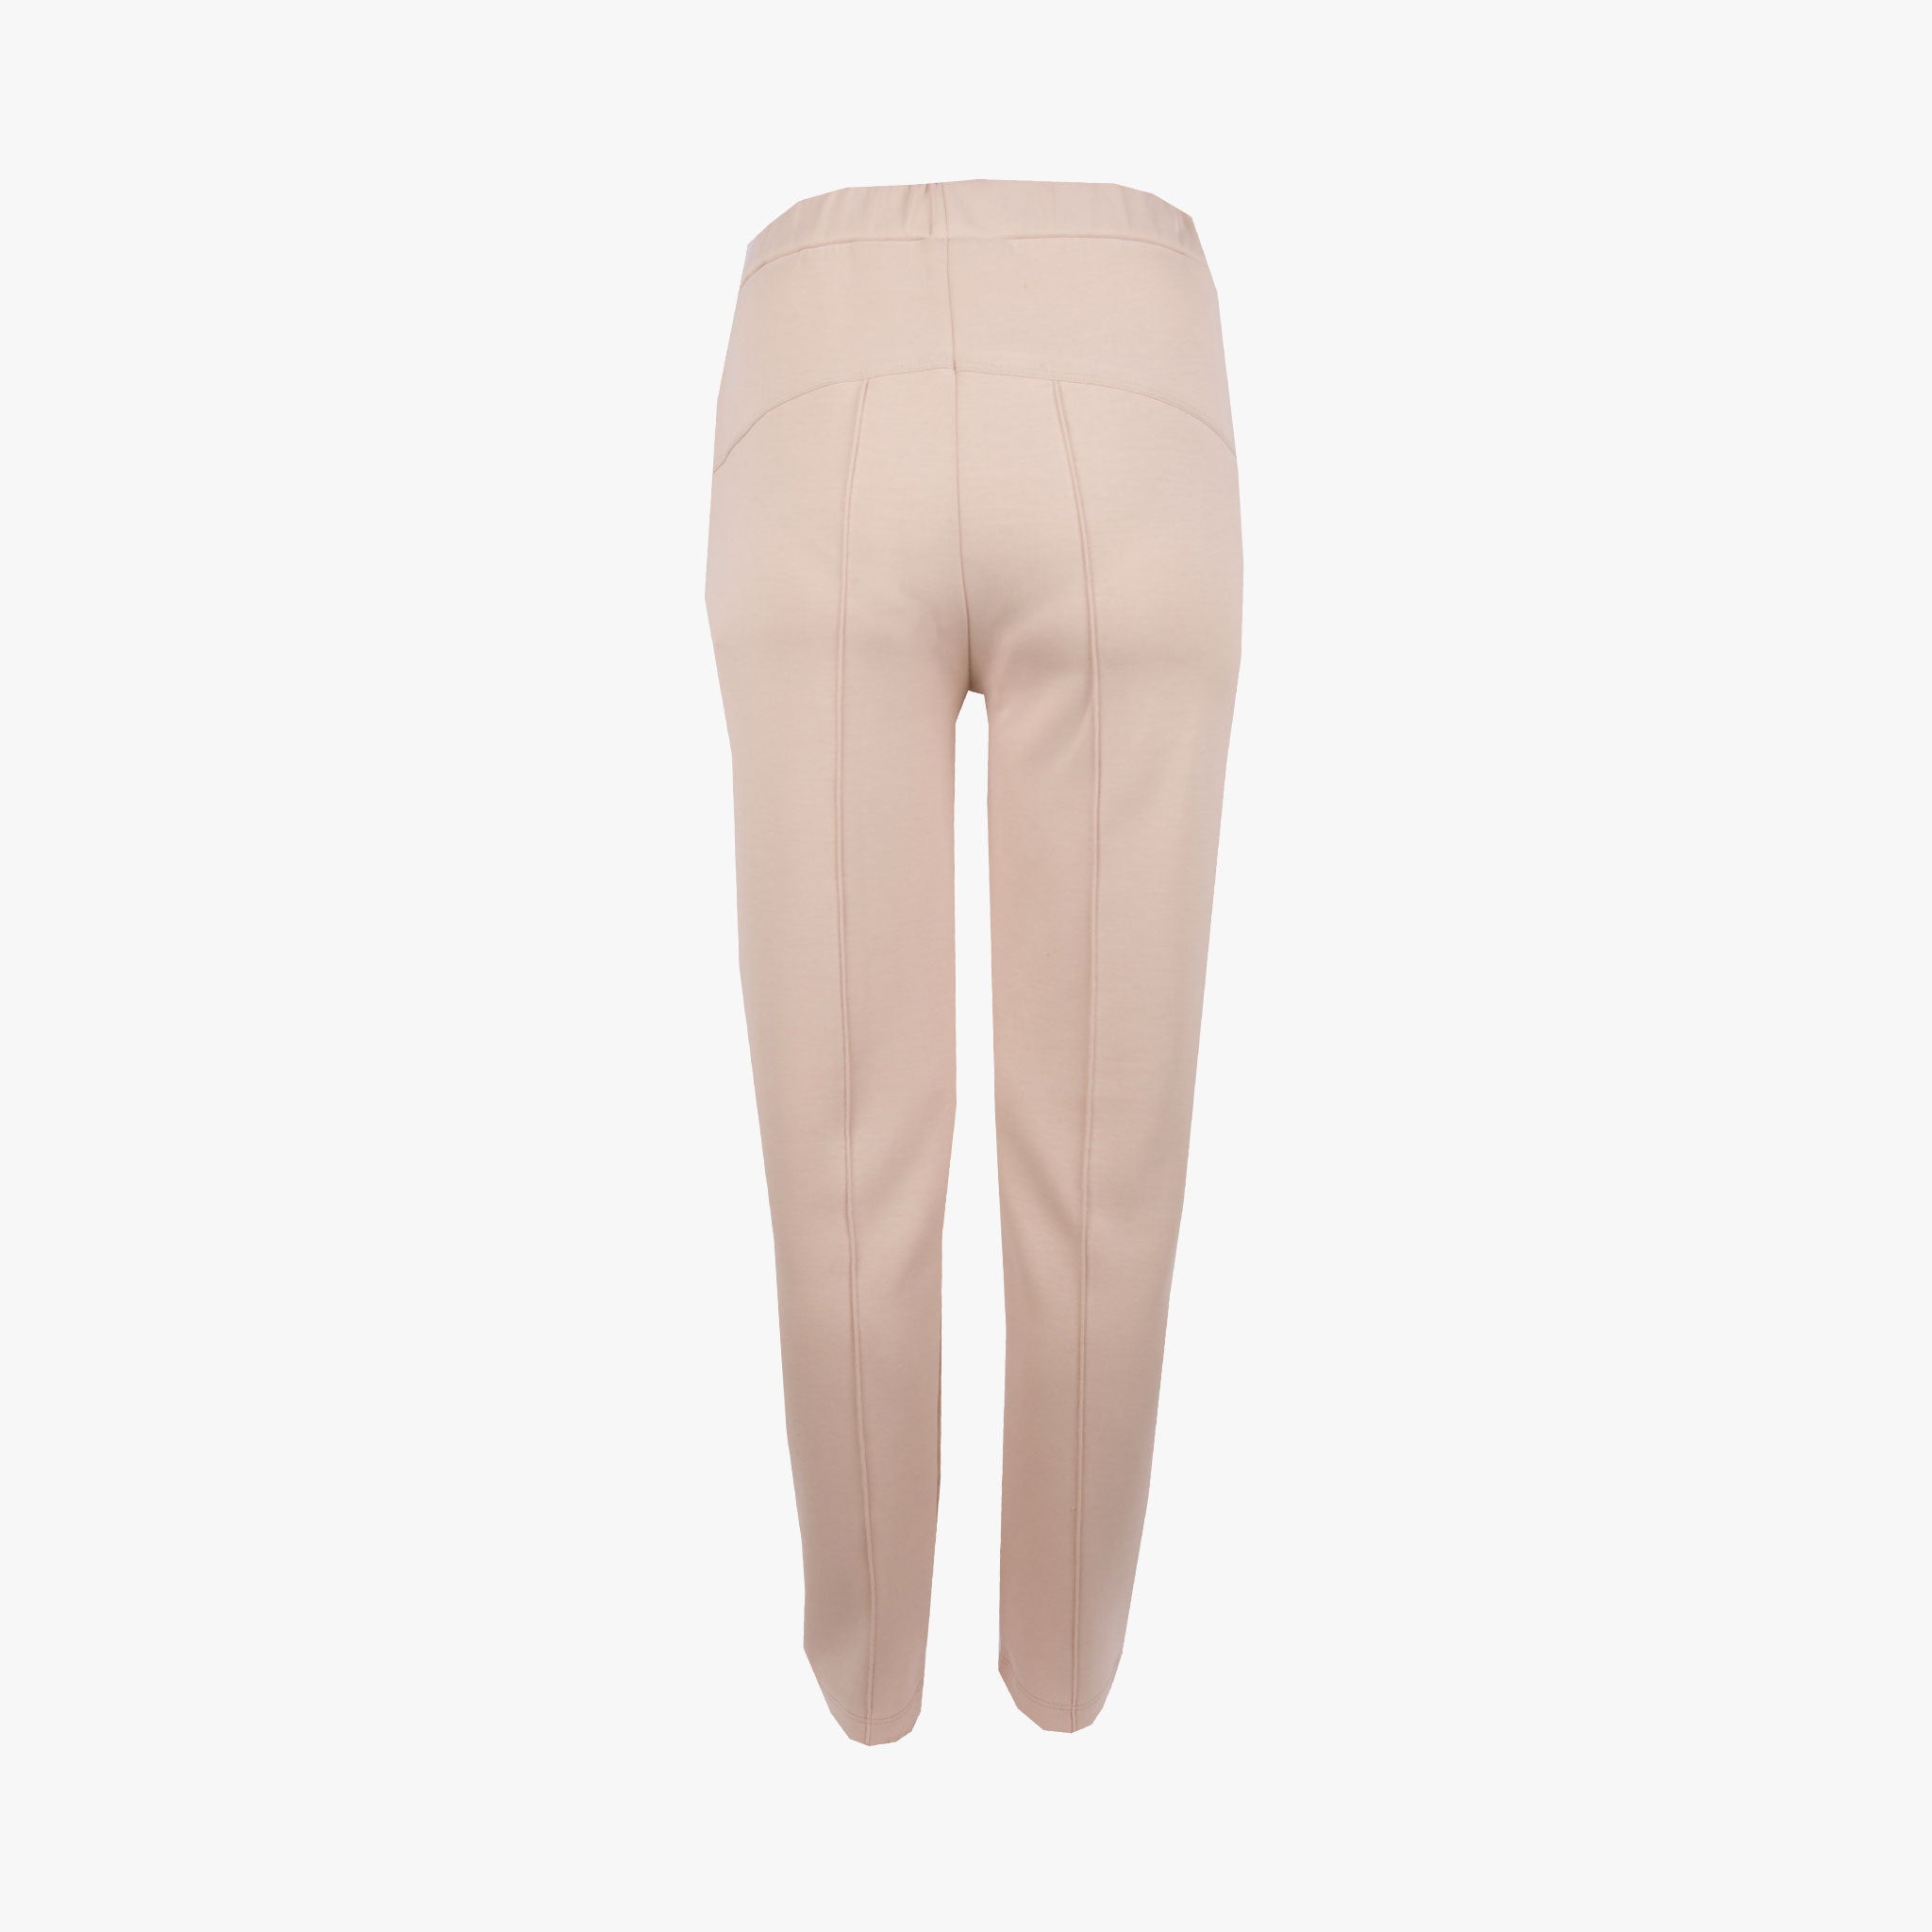 Sold out Hose Biese | beige